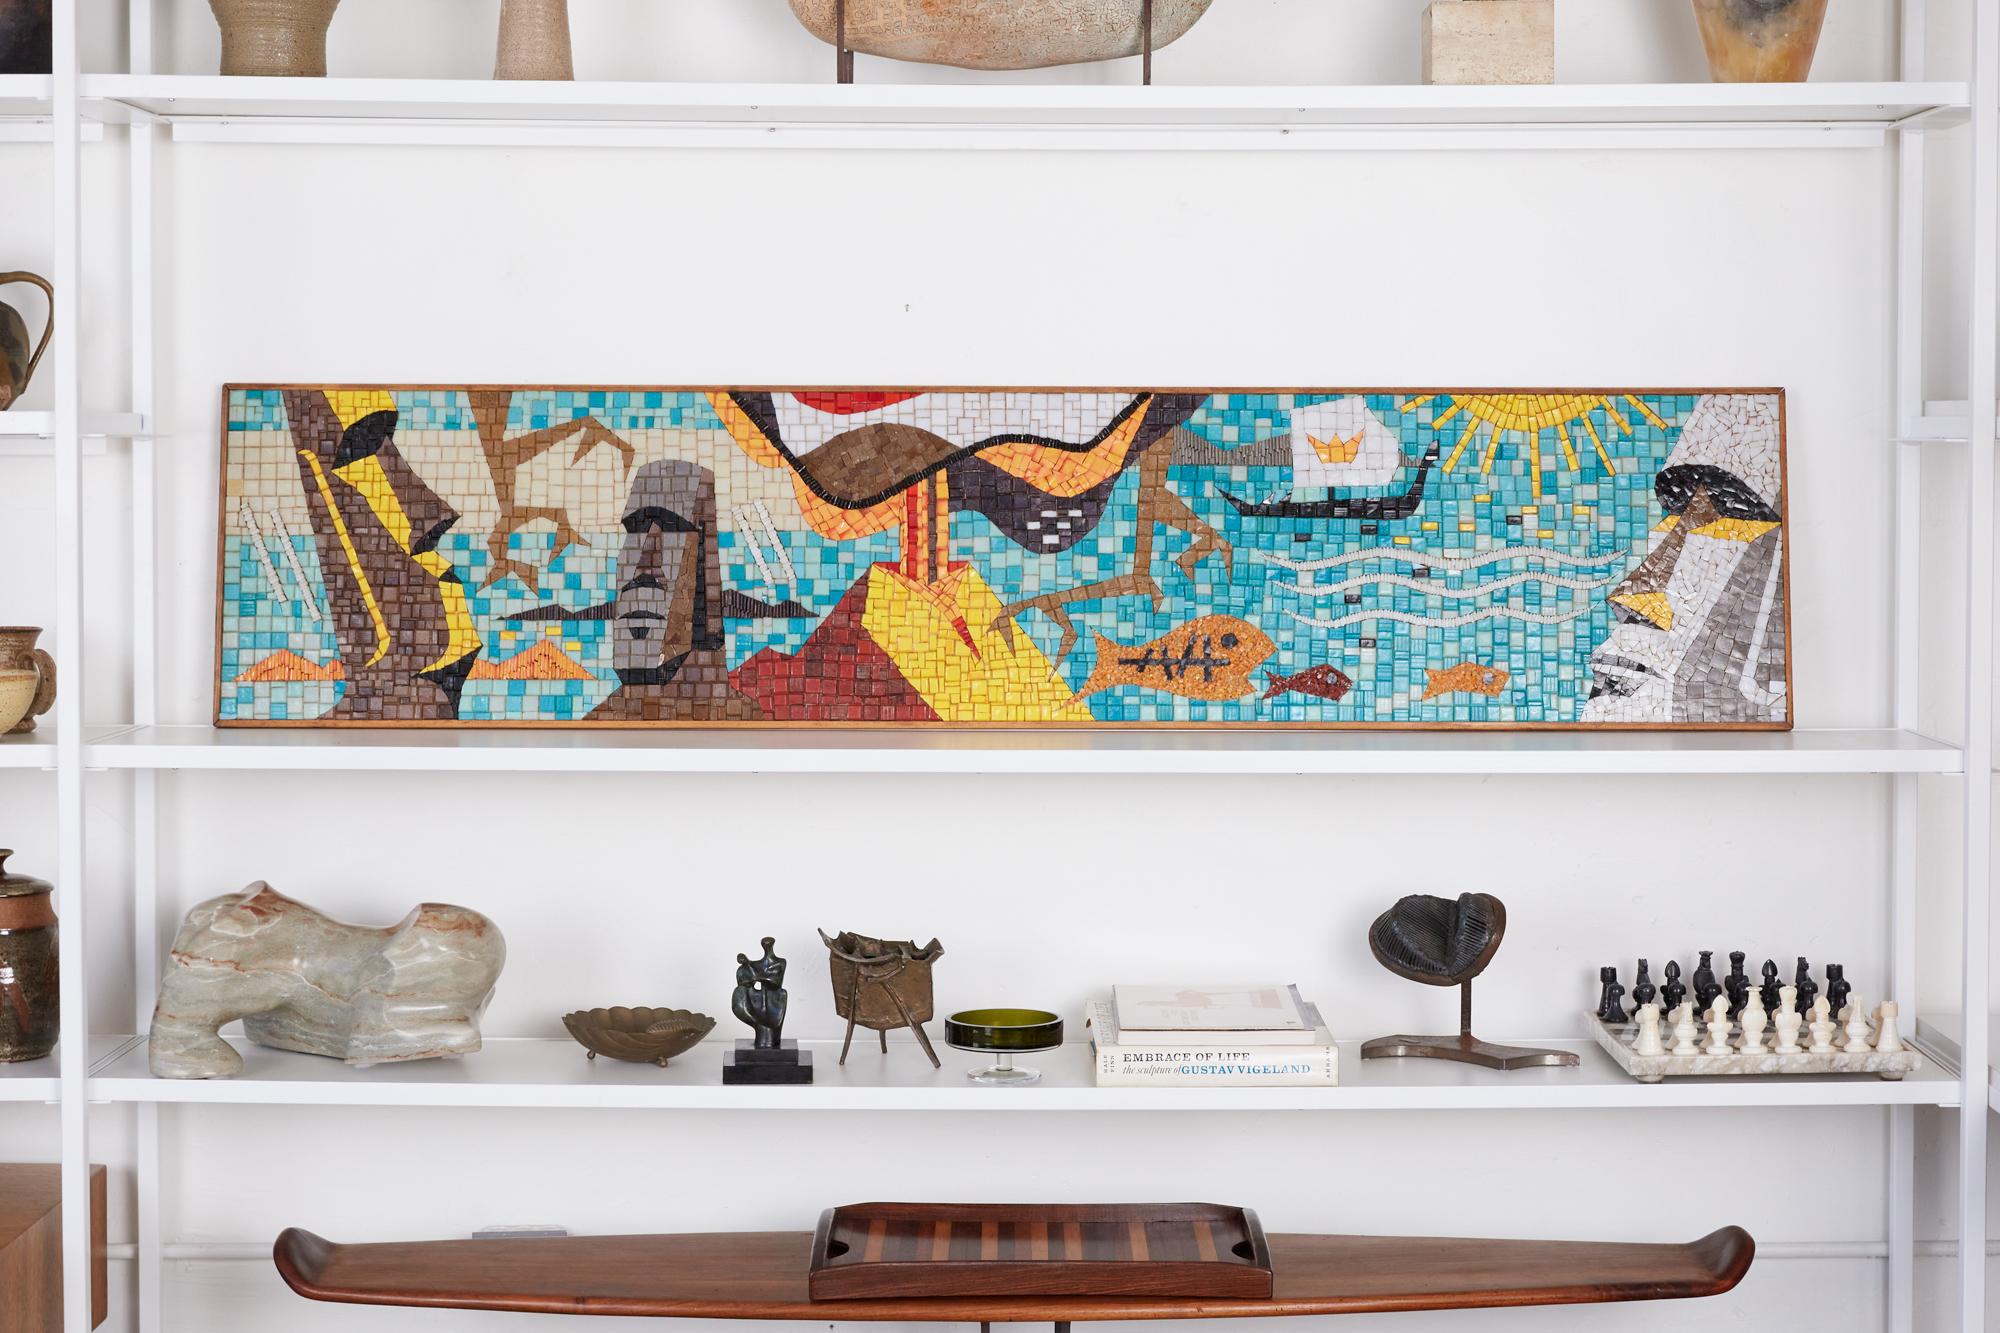 Mosaic tile wall art in the style of Evelyn Ackerman, circa 1970s. The wall art piece features a depiction of a volcanic mountain, fish in the ocean, and the carved stone figures, or Moai on Easter Island in Polynesia. The scene is made of multiple